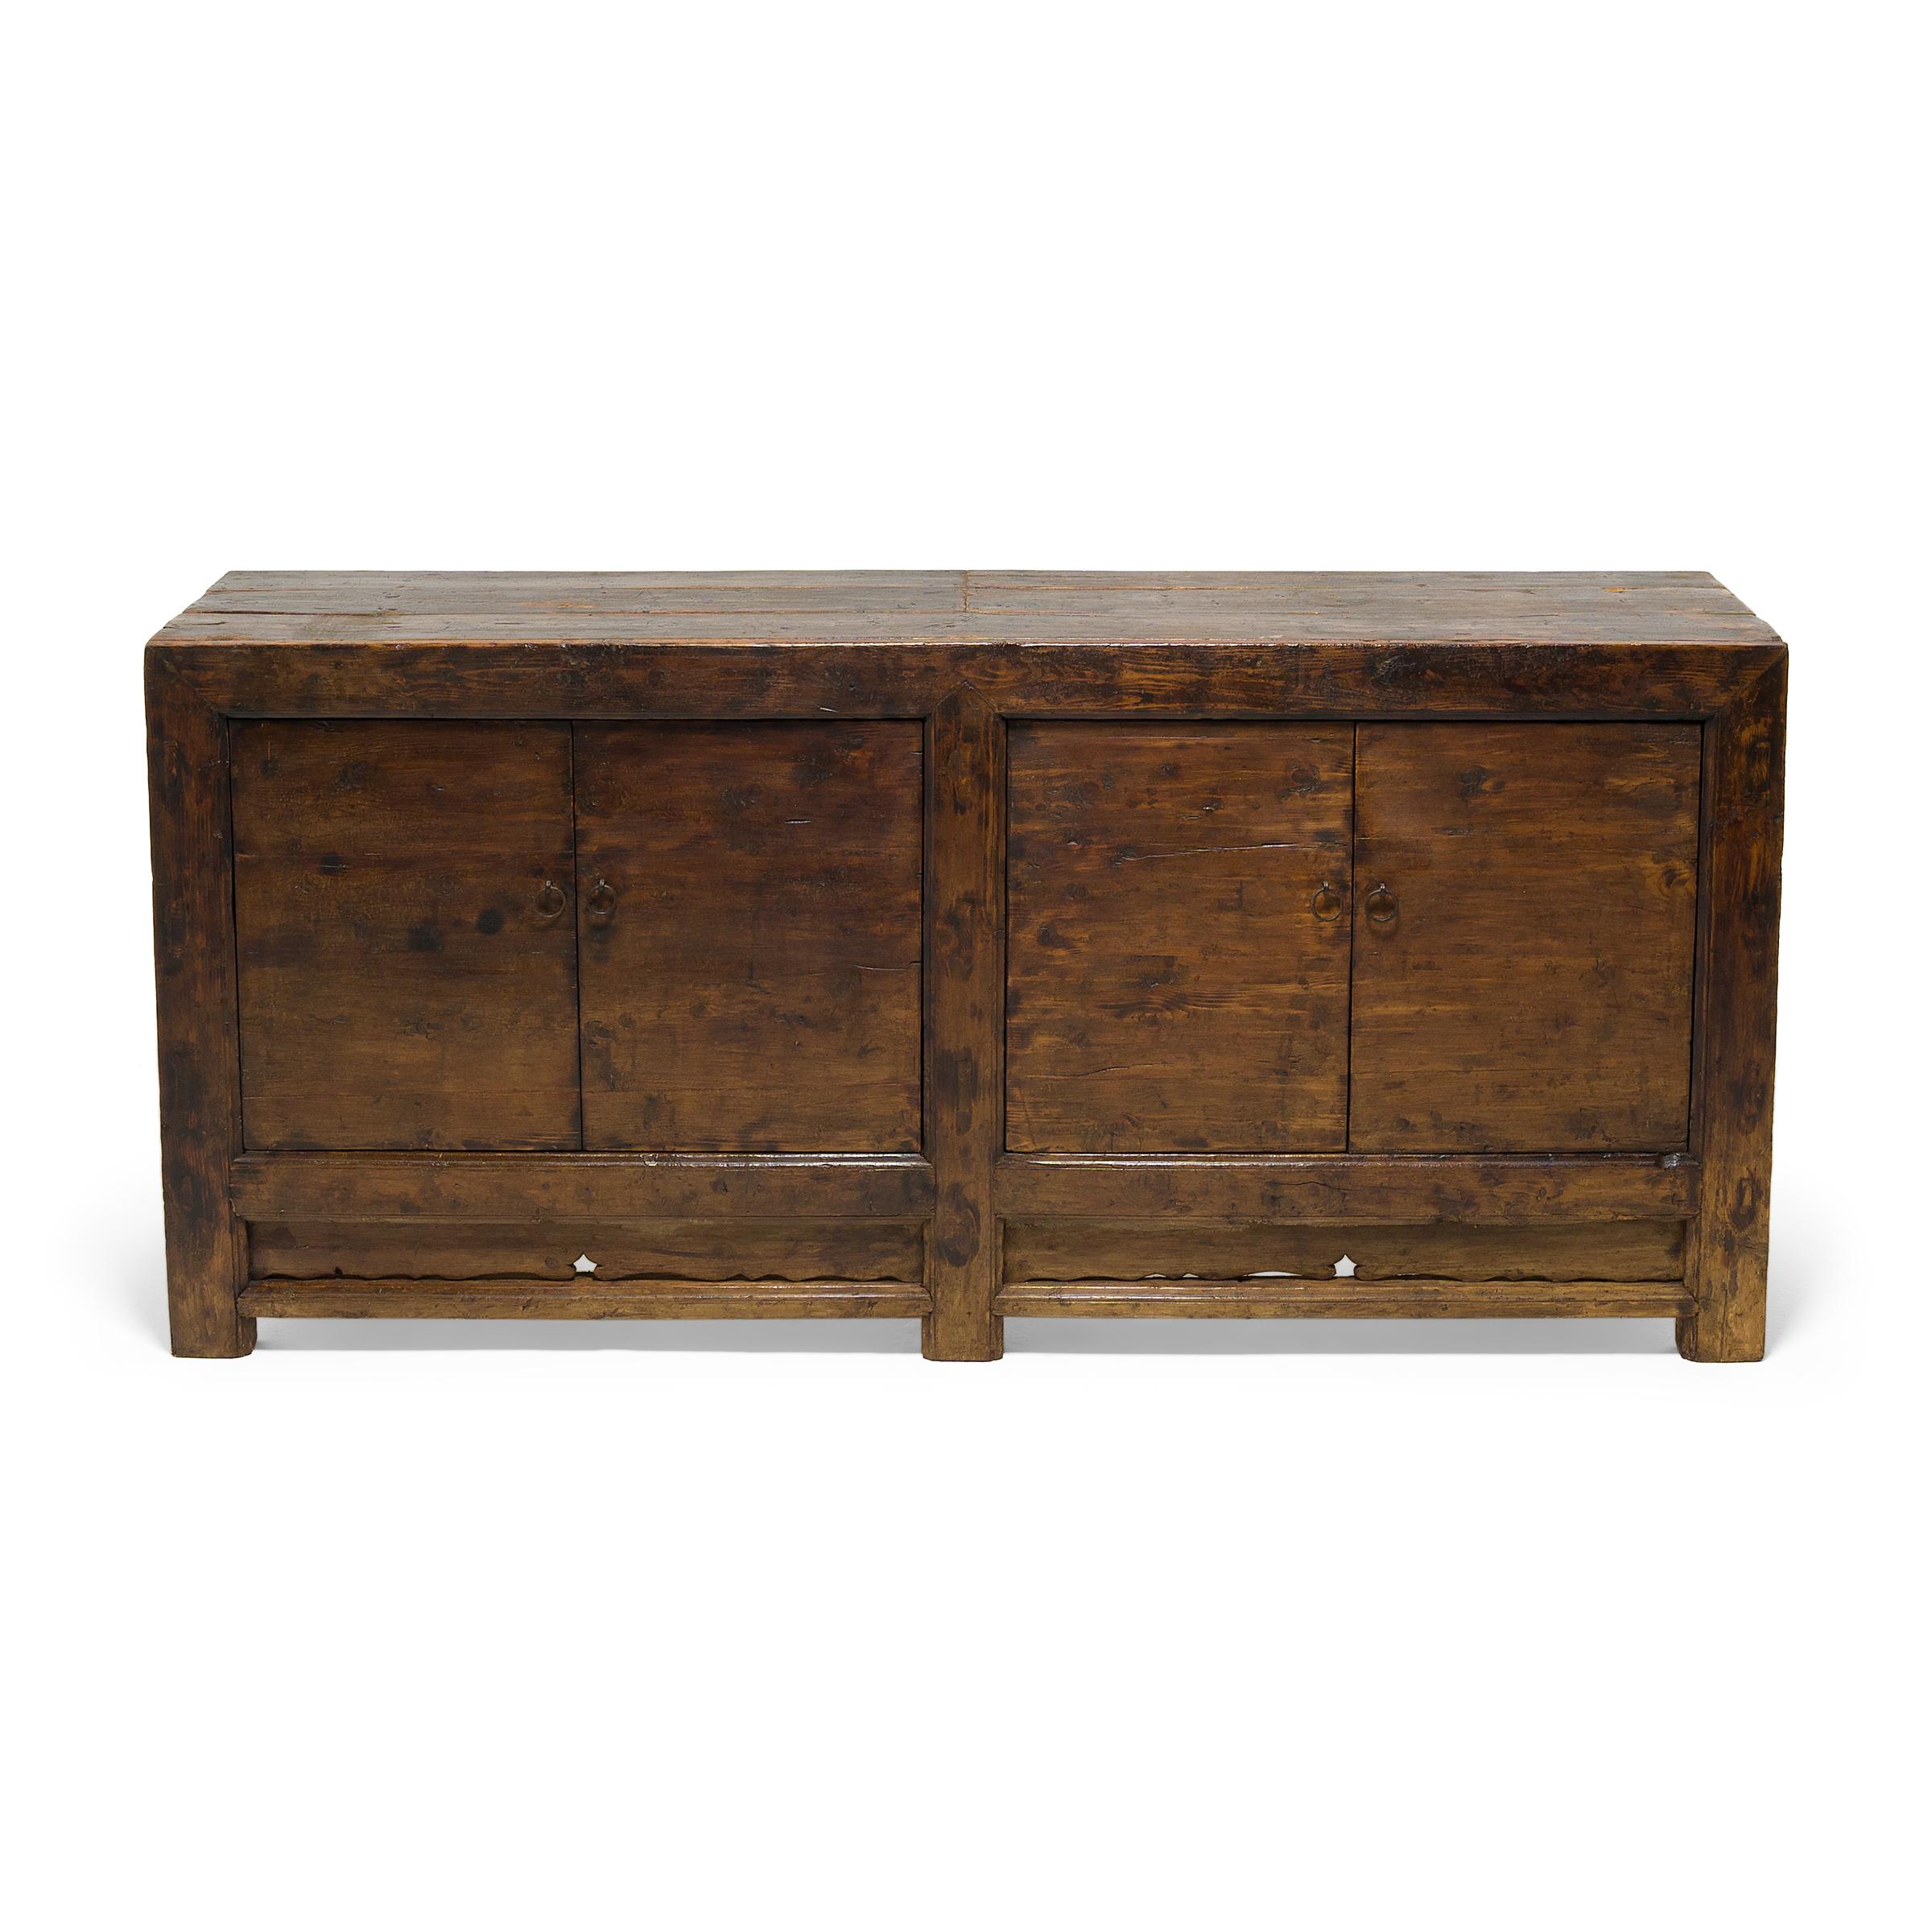 19th Century Chinese Great Plains Coffer, c. 1880 For Sale